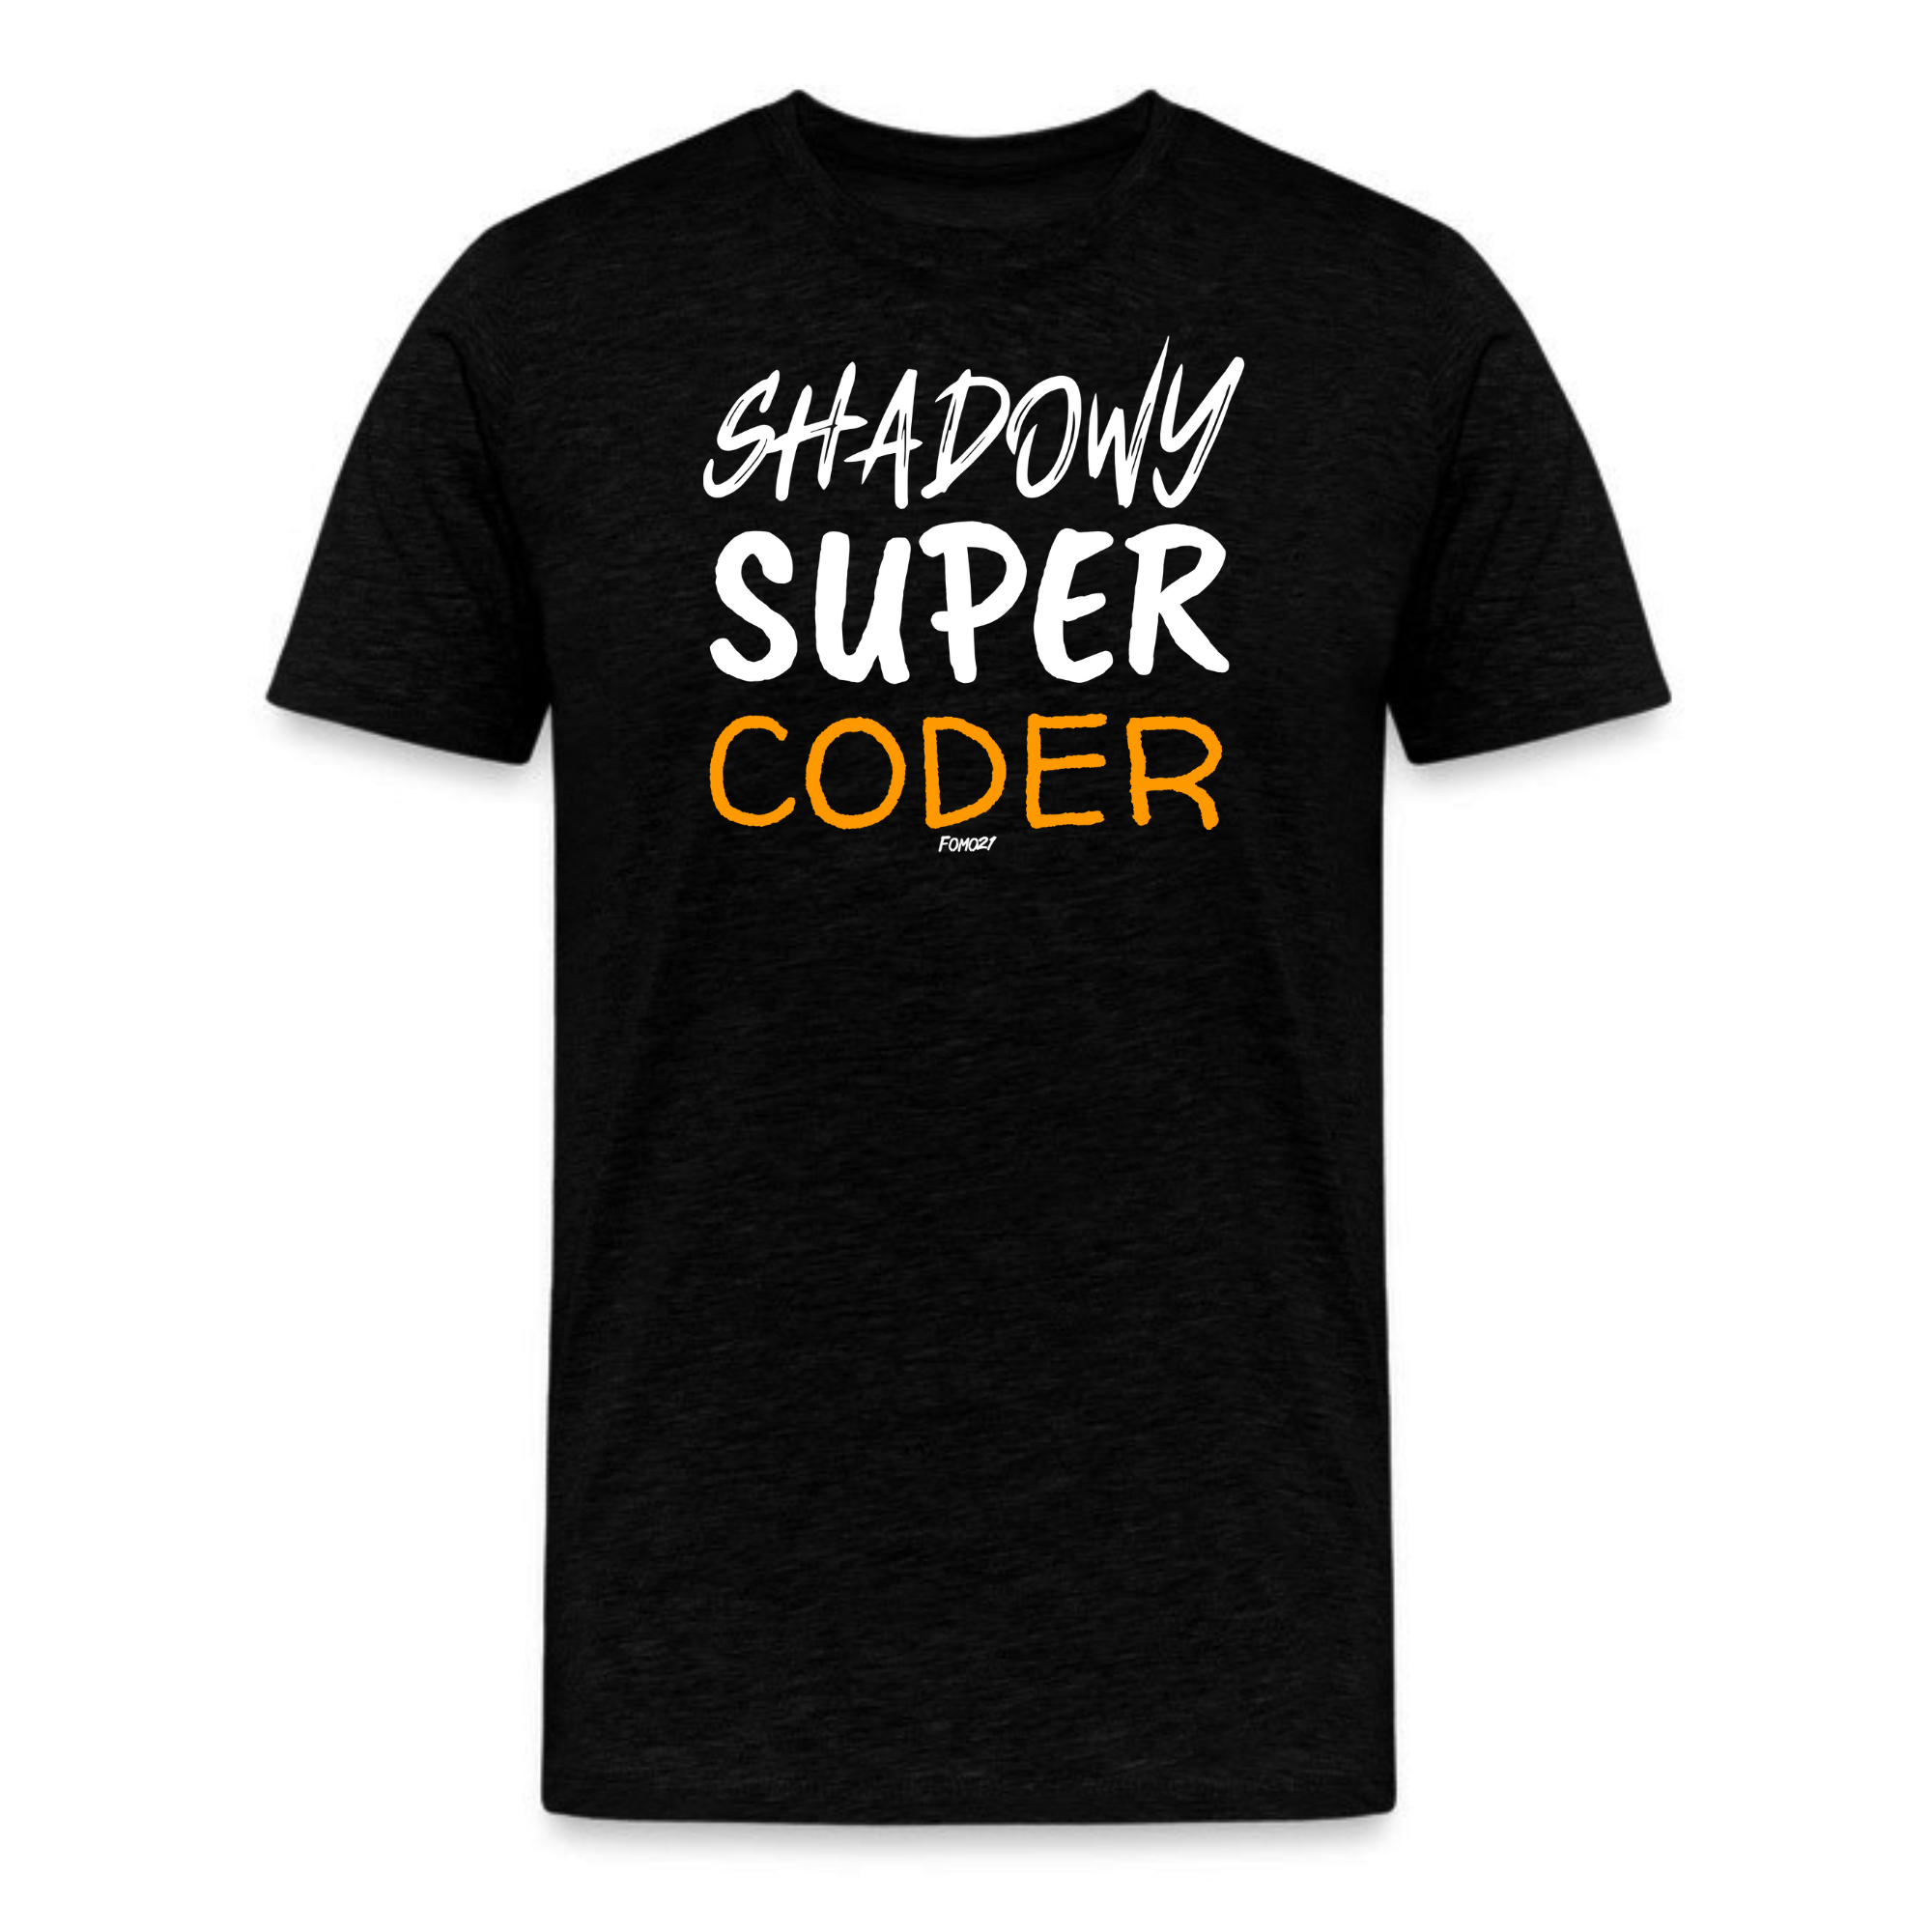 Shadowy Super Coder - Collection